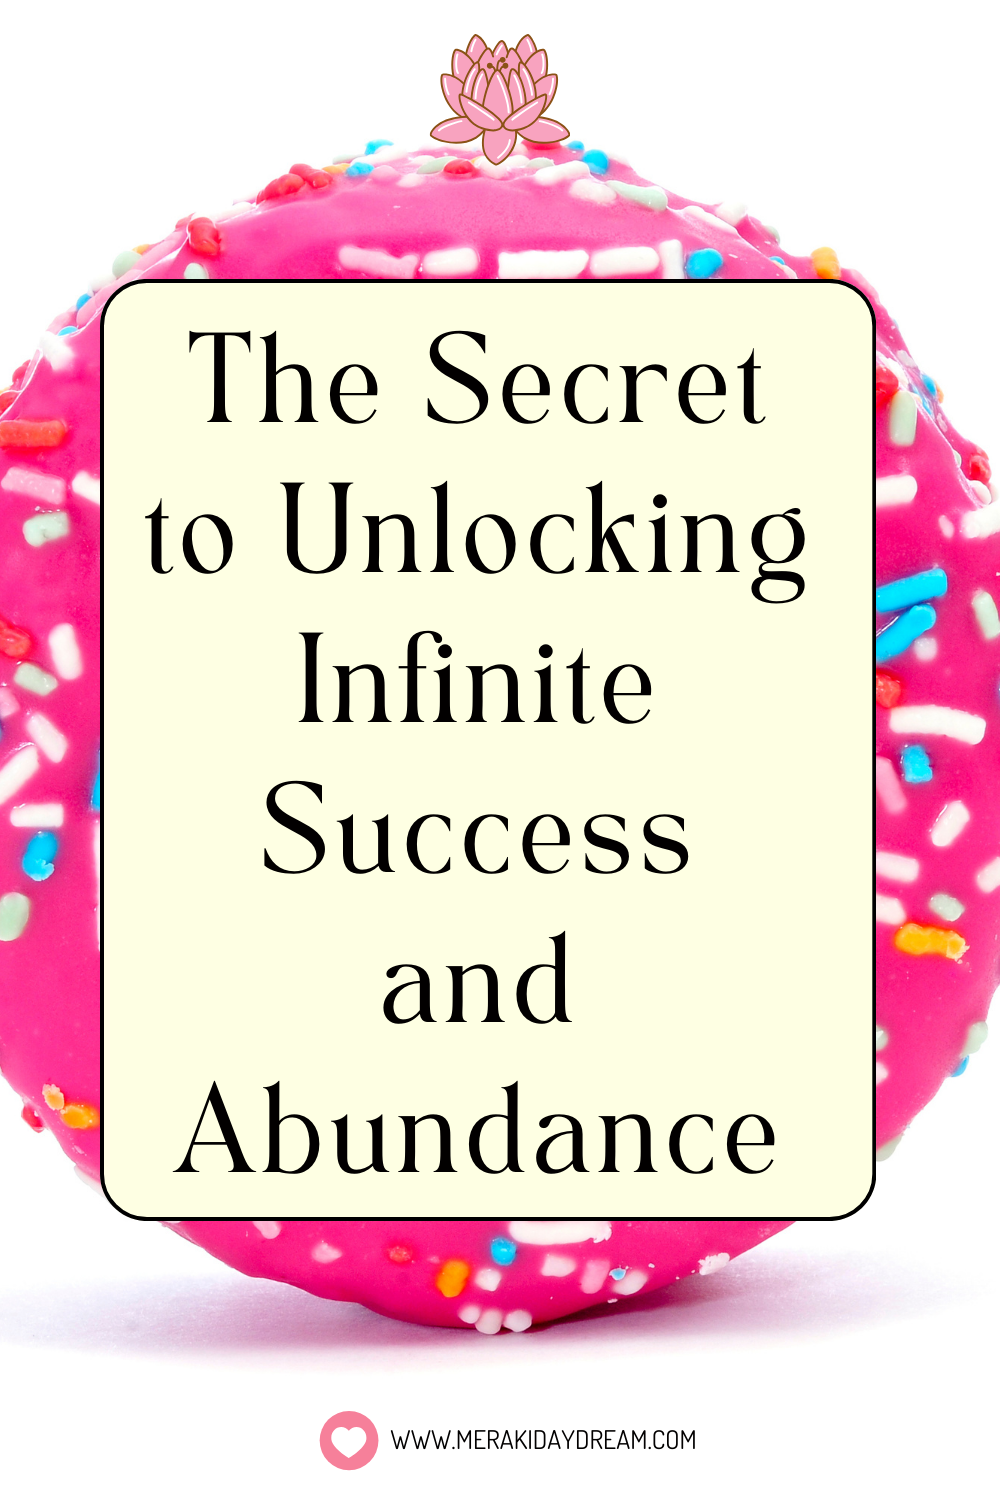 The Power of Gratitude: How to Unlock Abundance and Success in Your Life